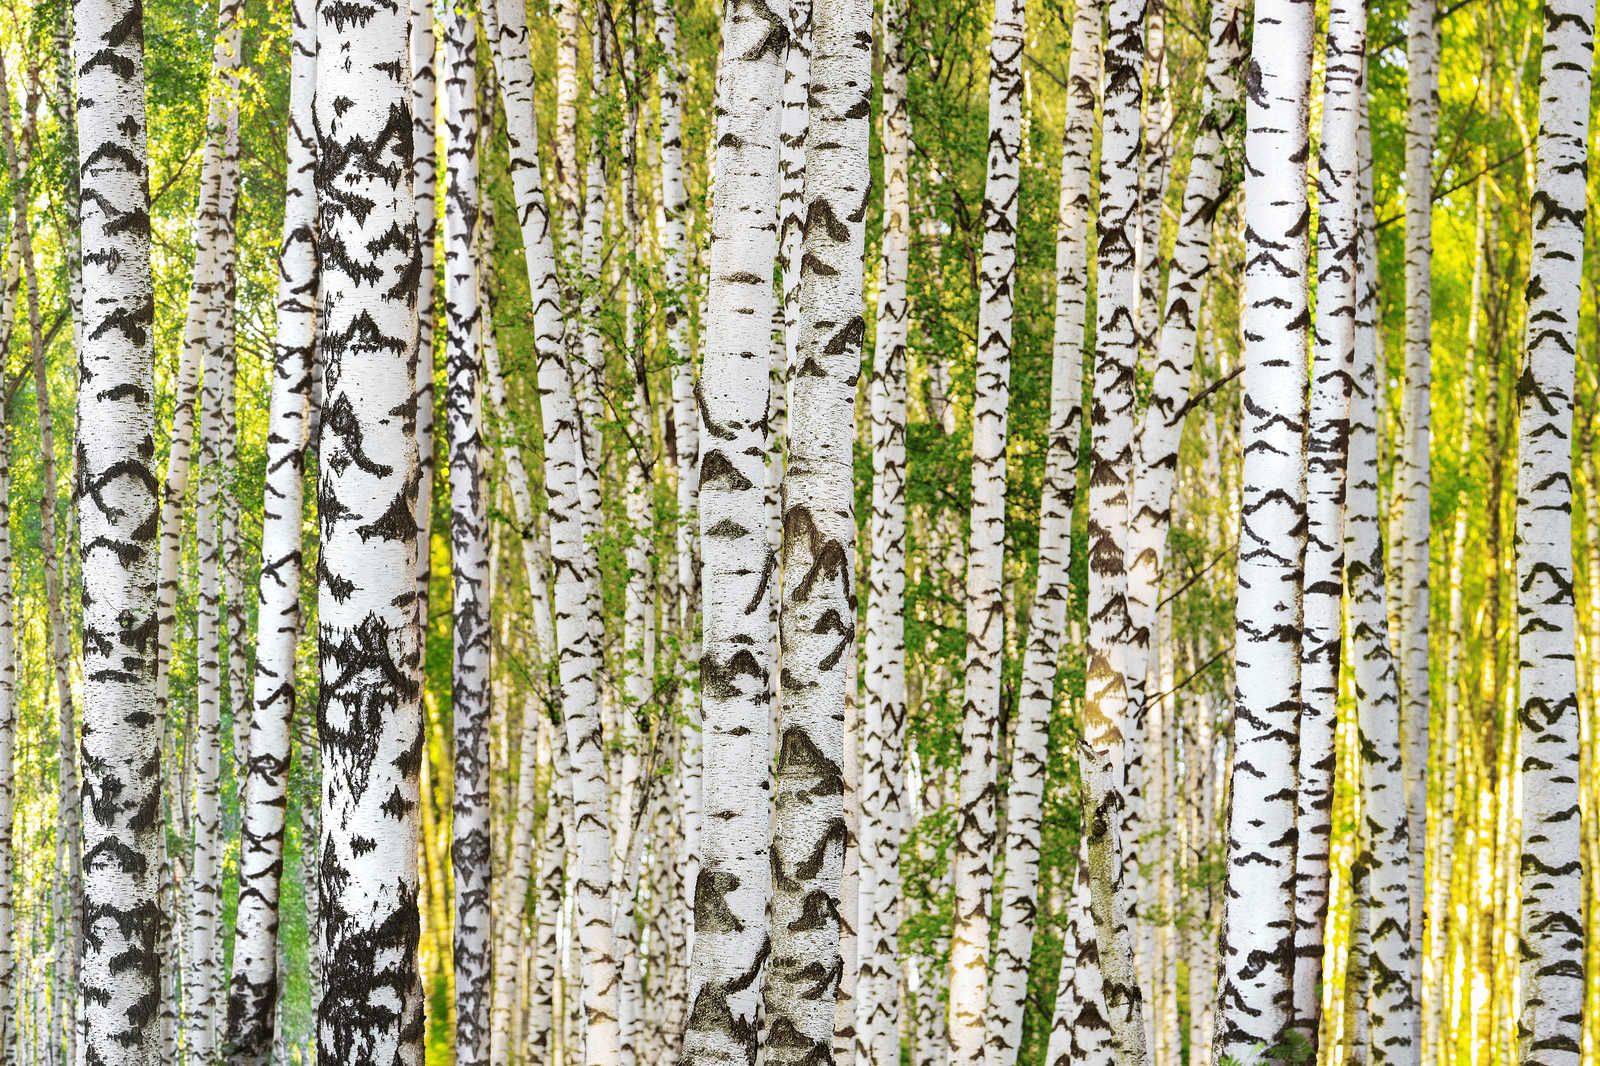             Birch Forest Canvas Painting Tree Trunk Motif - 0.90 m x 0.60 m
        